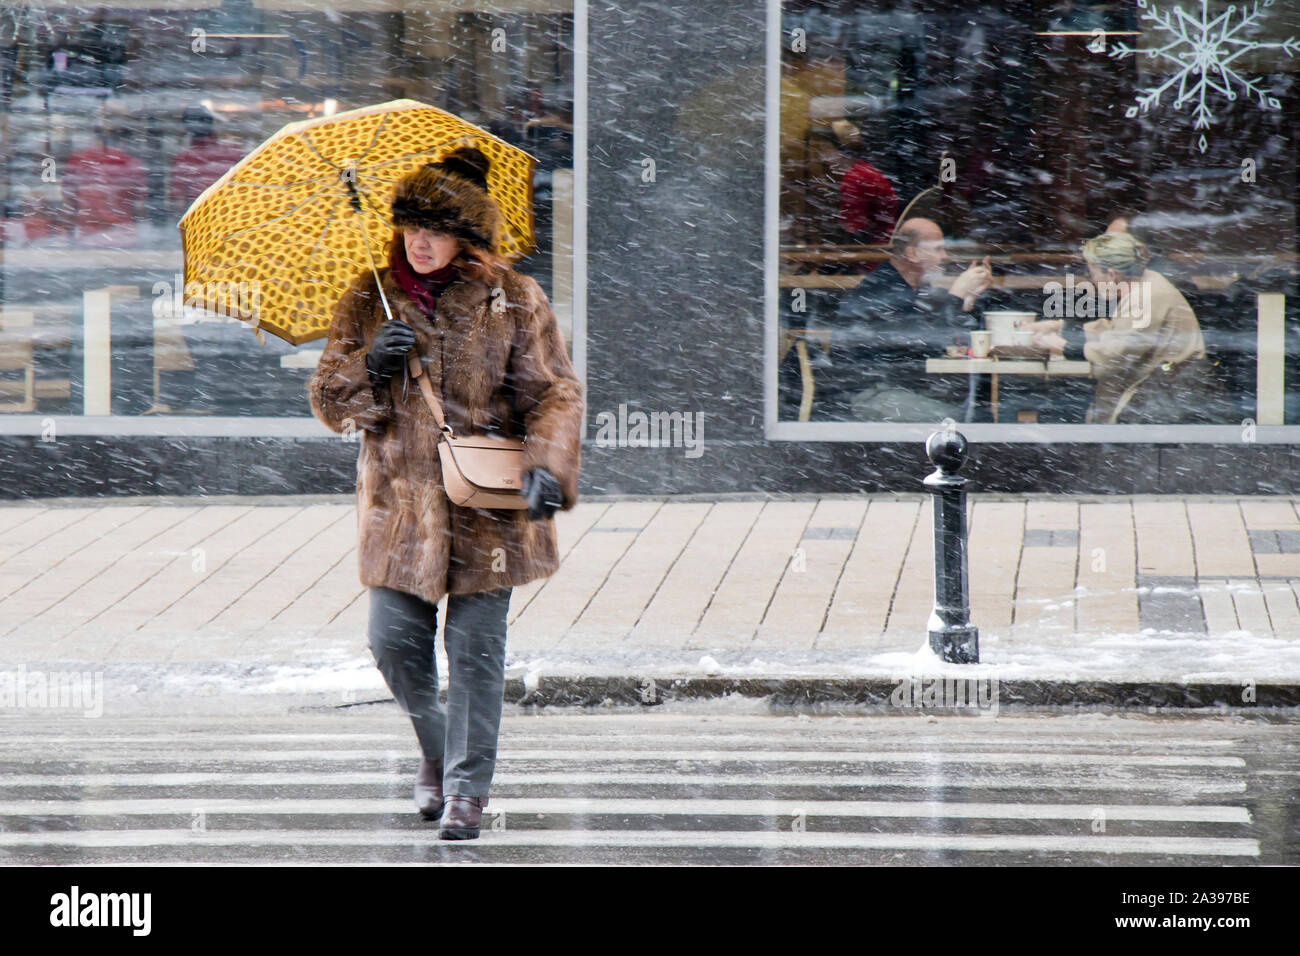 Belgrade, Serbia - January 3, 2019: One mature women in furs crossing the street  under umbrella on snowy day, and elder couple dining together behind Stock Photo